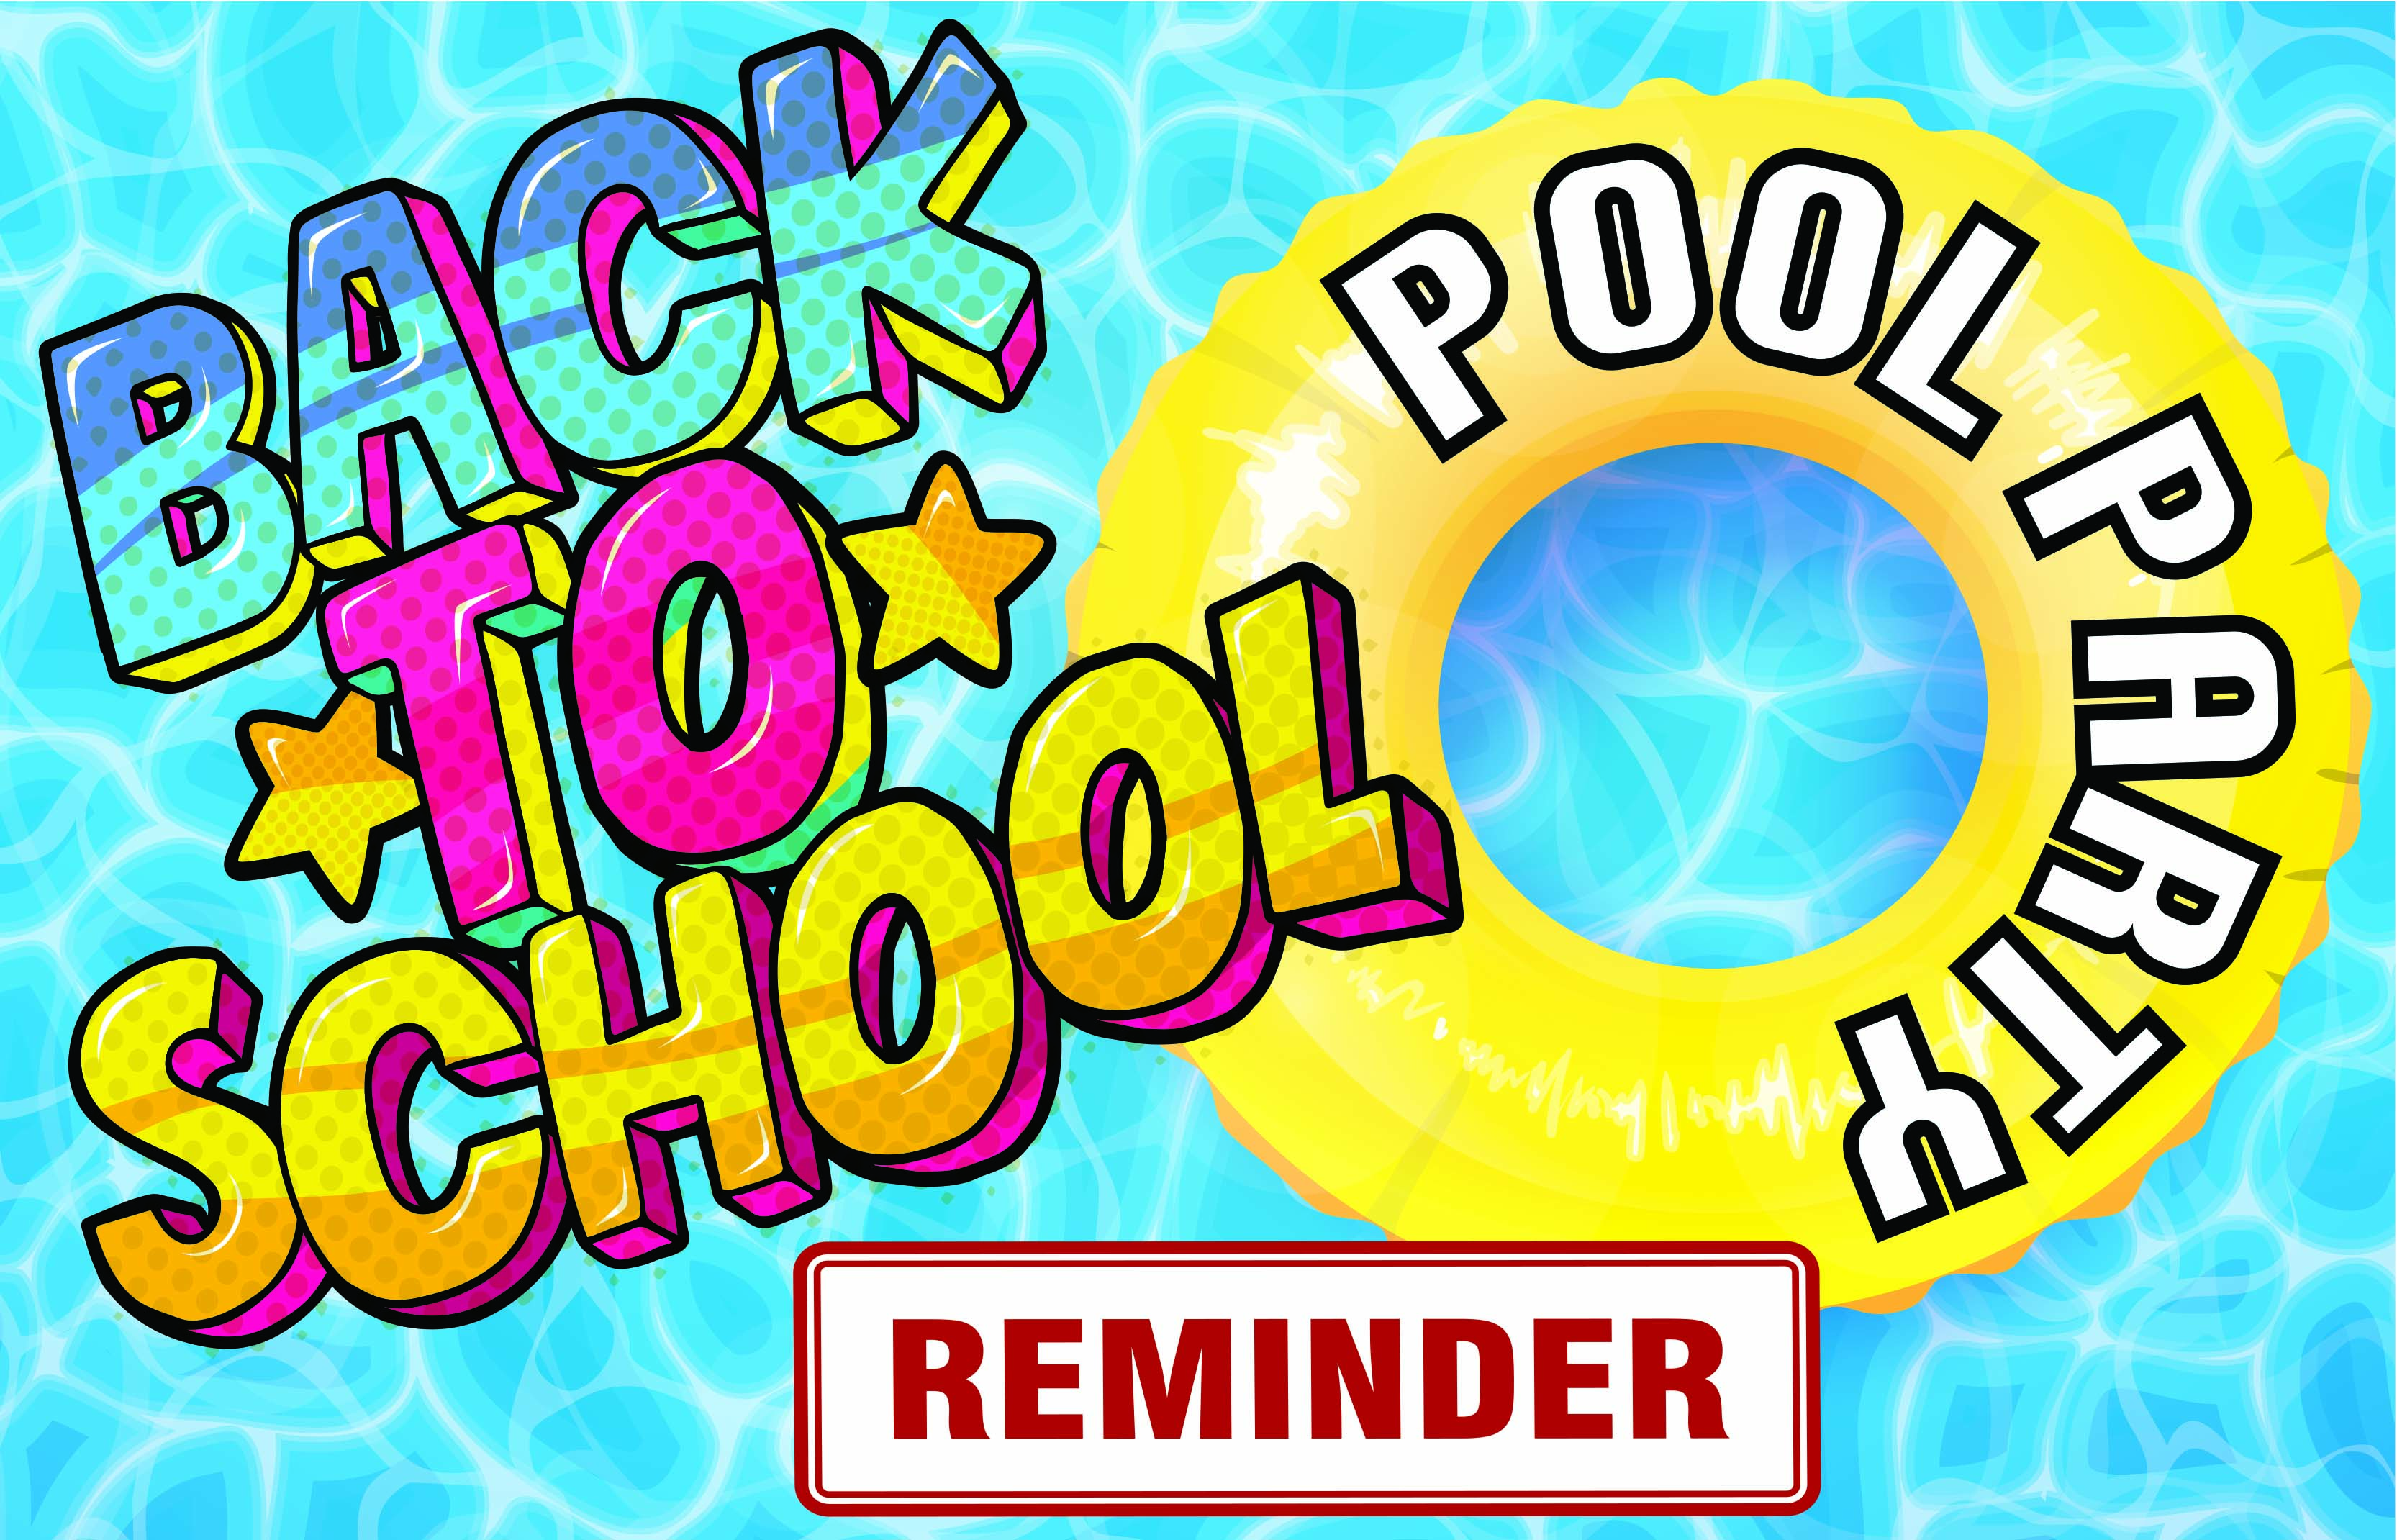 Reminder: Annual Back-to-School Party